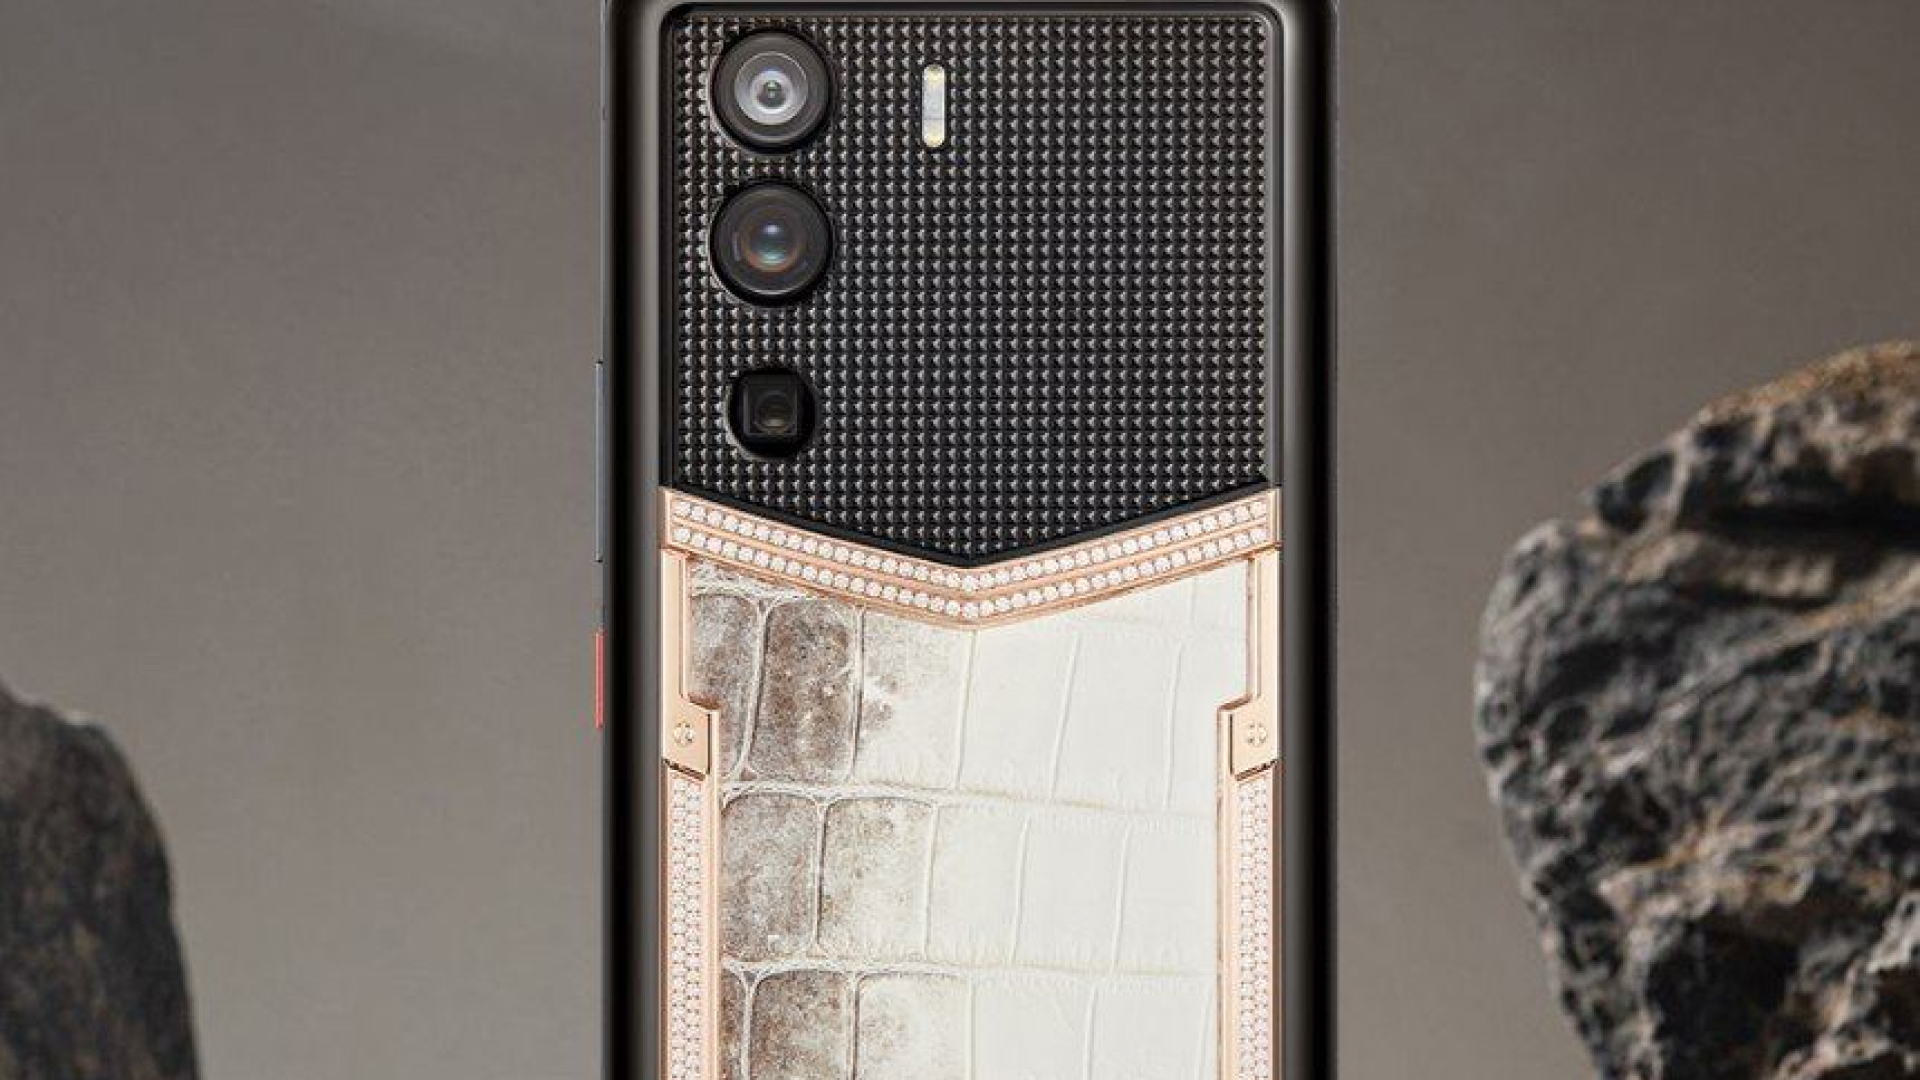 The Race is On: Vertu's Web3 Phone vs. Solana Saga - Who Will Come Out on Top?